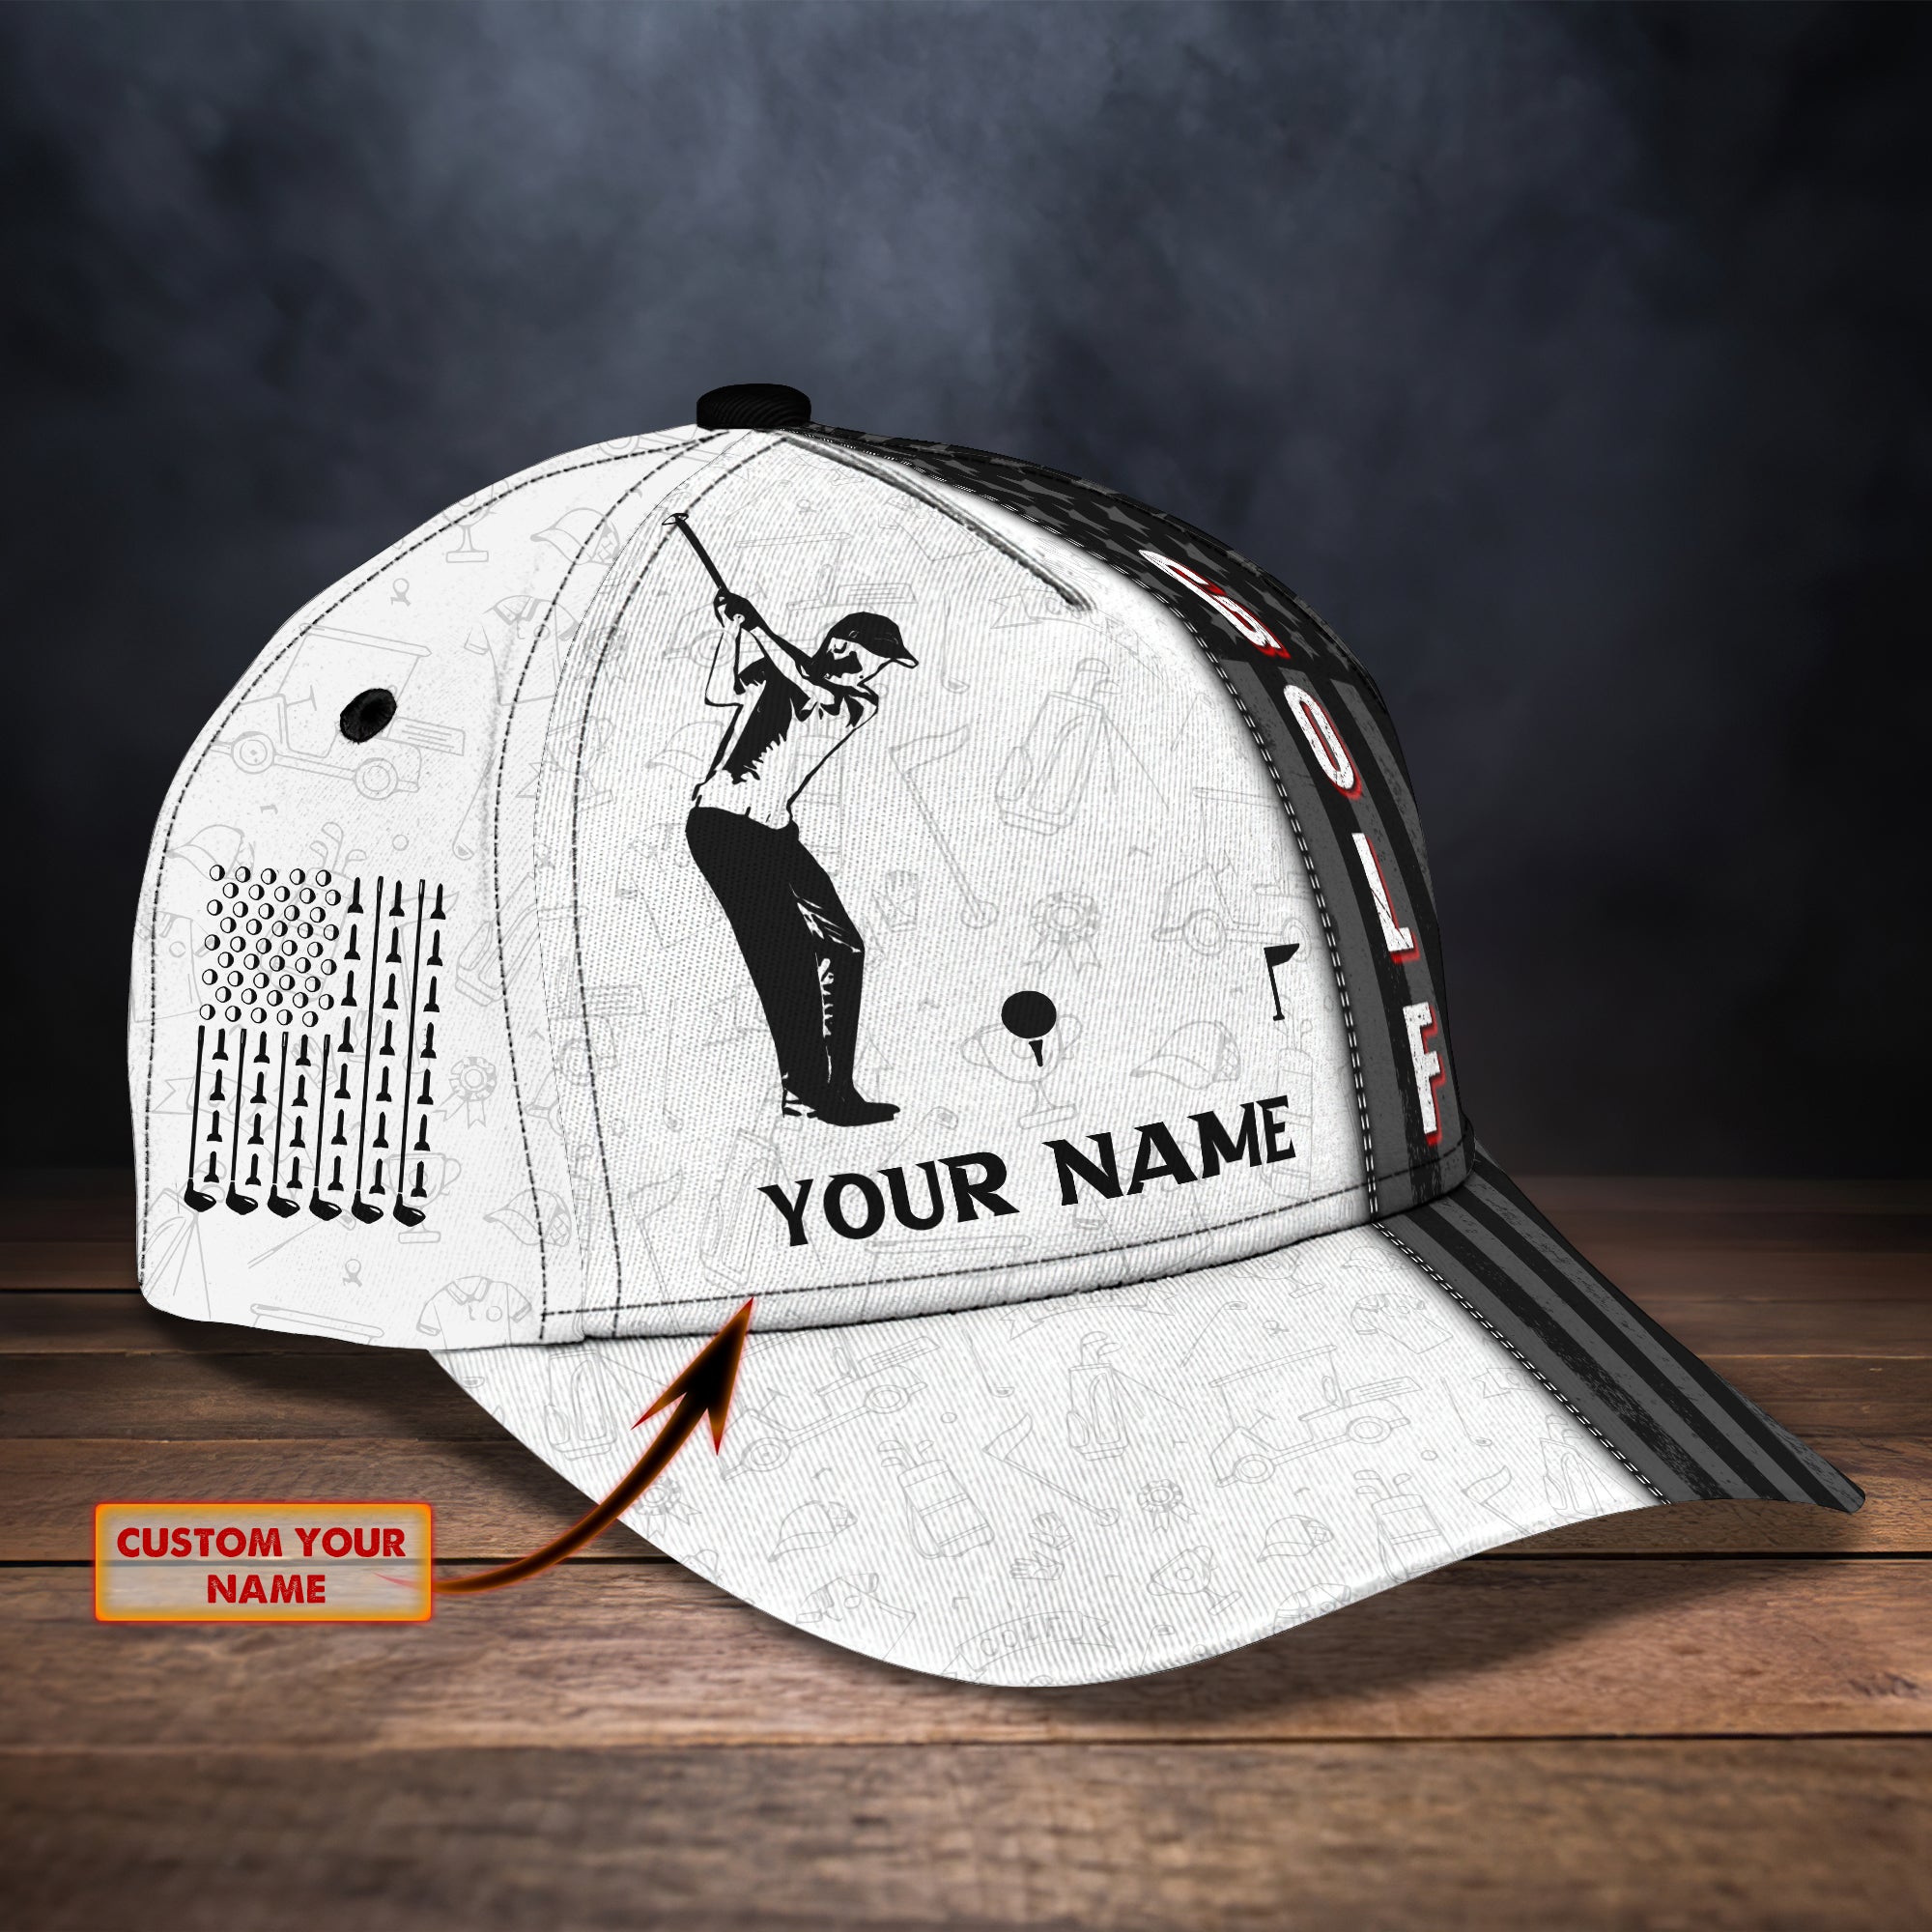 Golf - Personalized Name Cap001 - ATM2K